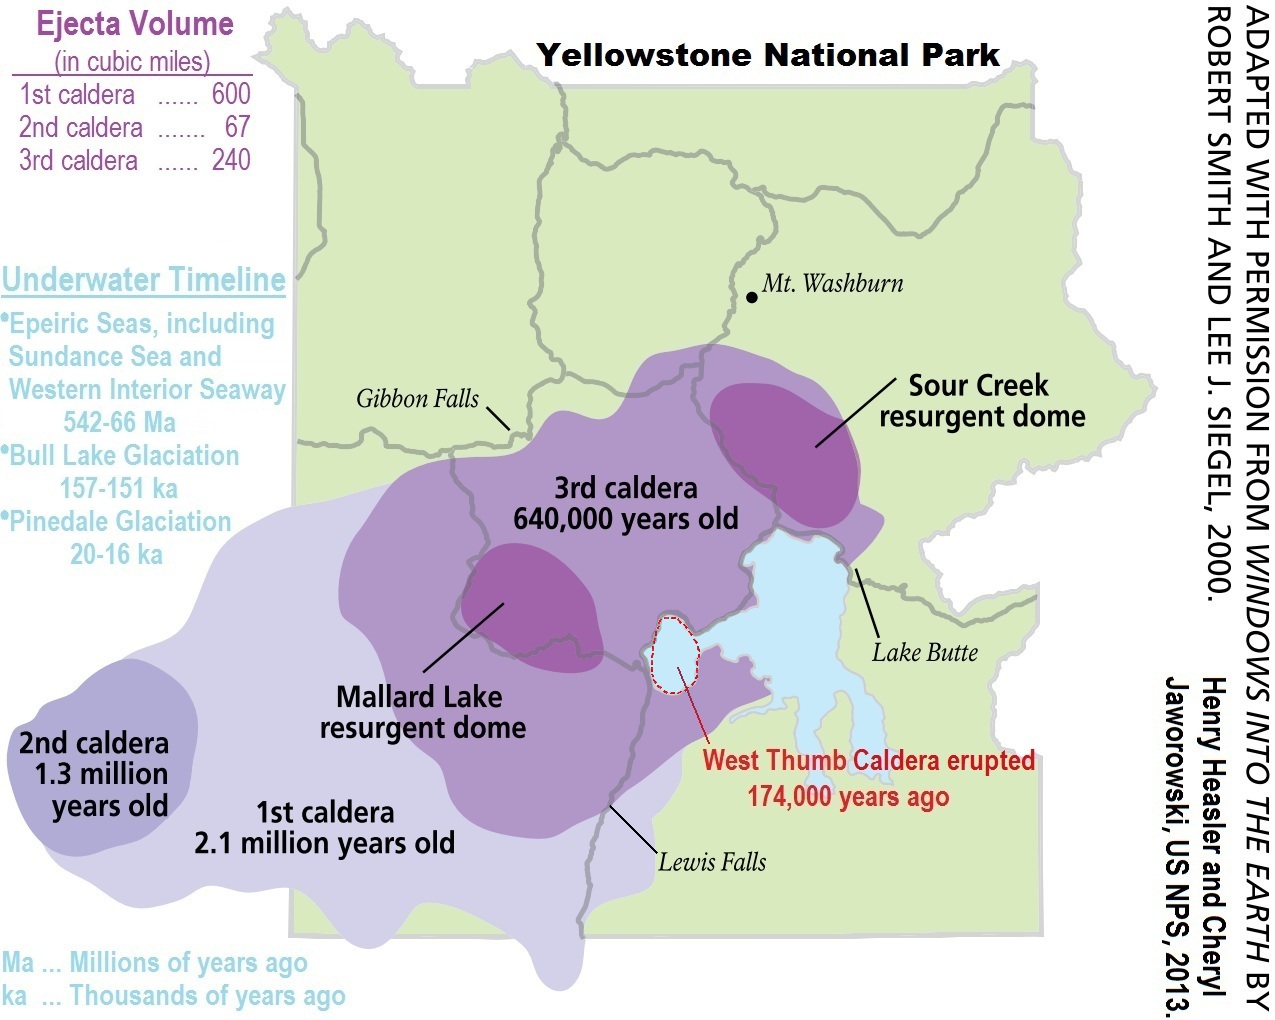 Map showing the shifting extent of the Yellowstone caldera over time. 